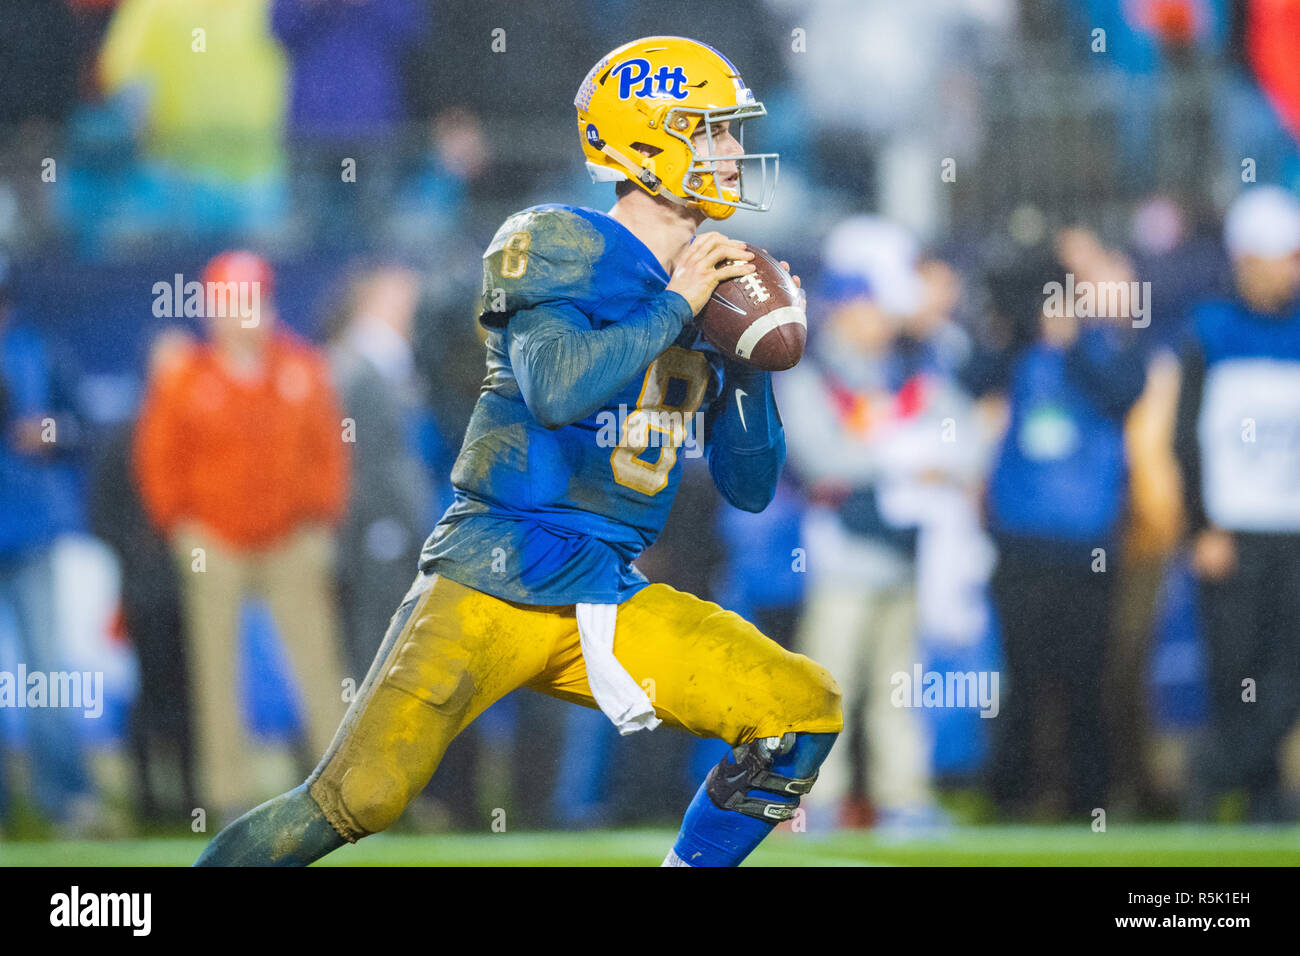 Pittsburgh Panthers quarterback Kenny Pickett (8) during the ACC College Football Championship game between Pitt and Clemson on Saturday December 1, 2018 at Bank of America Stadium in Charlotte, NC. Jacob Kupferman/CSM Stock Photo